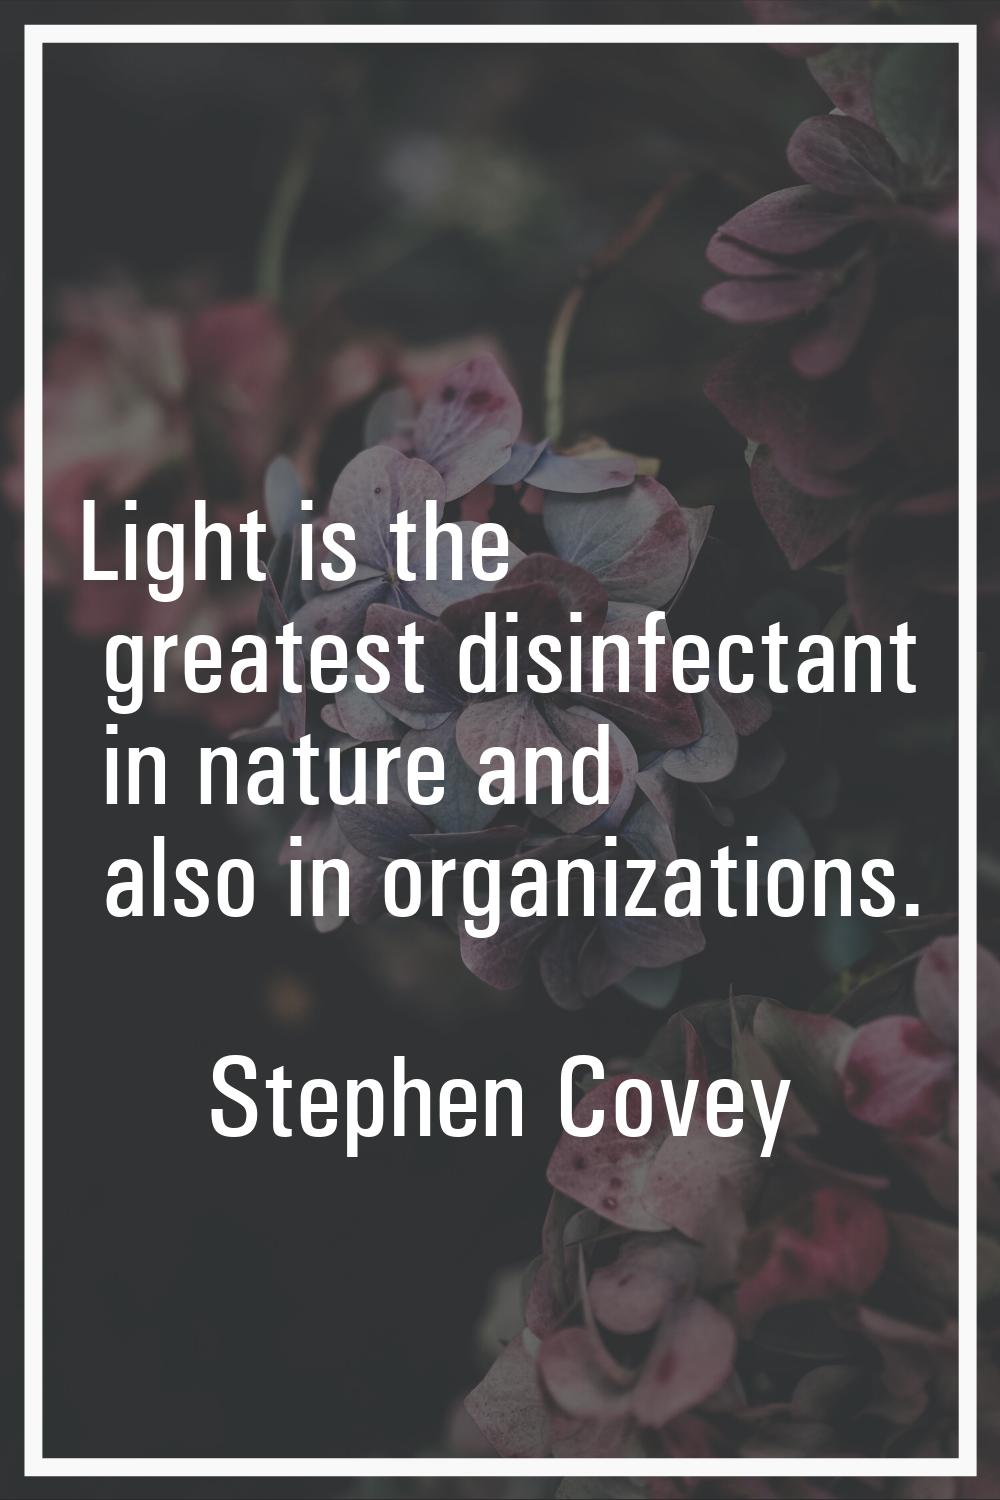 Light is the greatest disinfectant in nature and also in organizations.